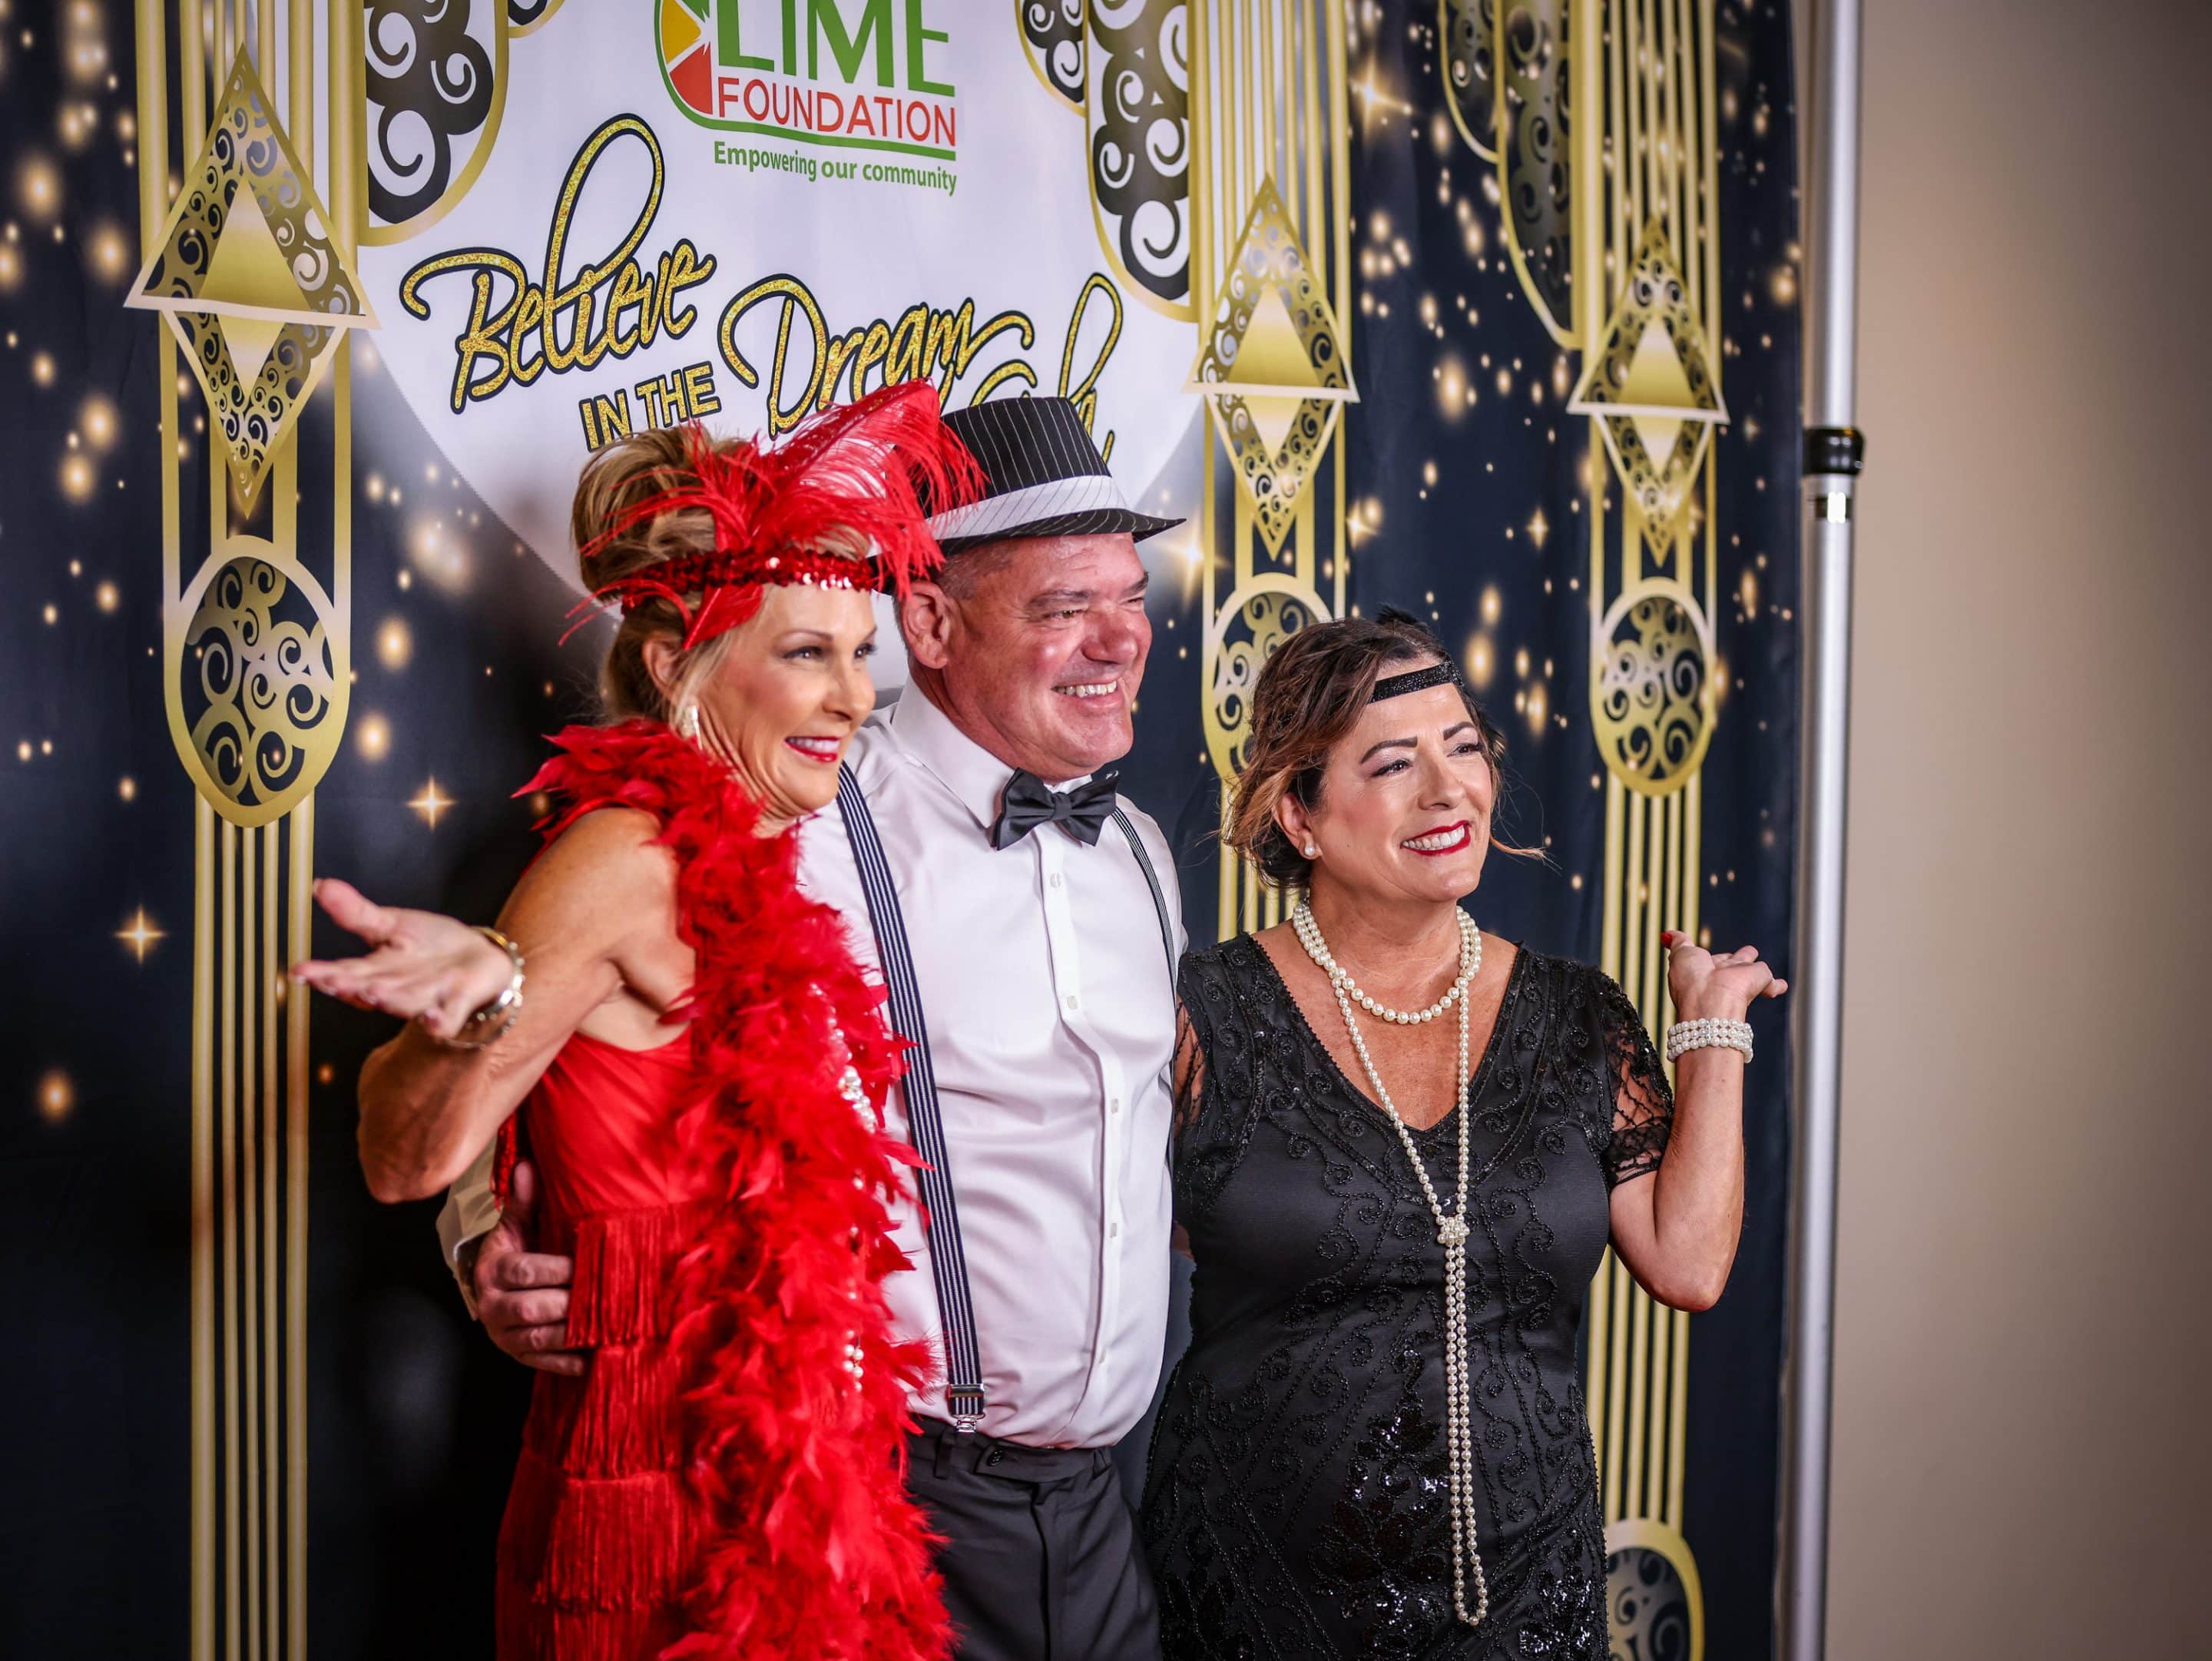 A group of people posing for a photo at a 1920's themed party hosted by The LIME Foundation of Santa Rosa, a Santa Rosa Non-Profit.